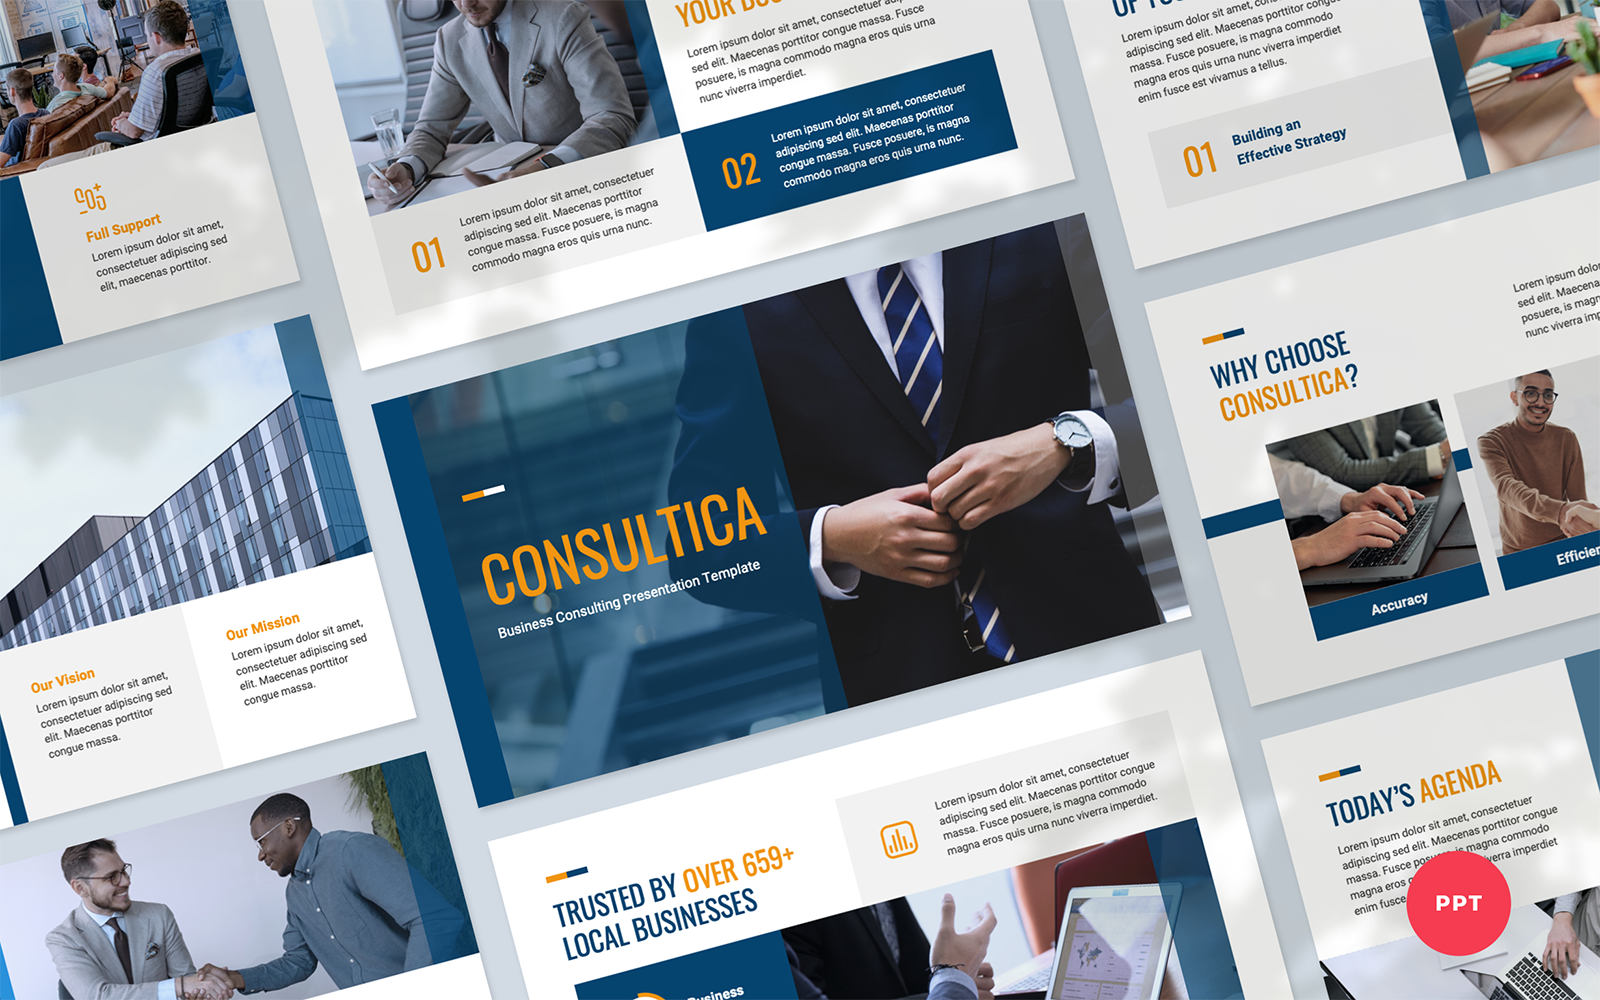 Consultica - Business Consulting Presentation PowerPoint Template